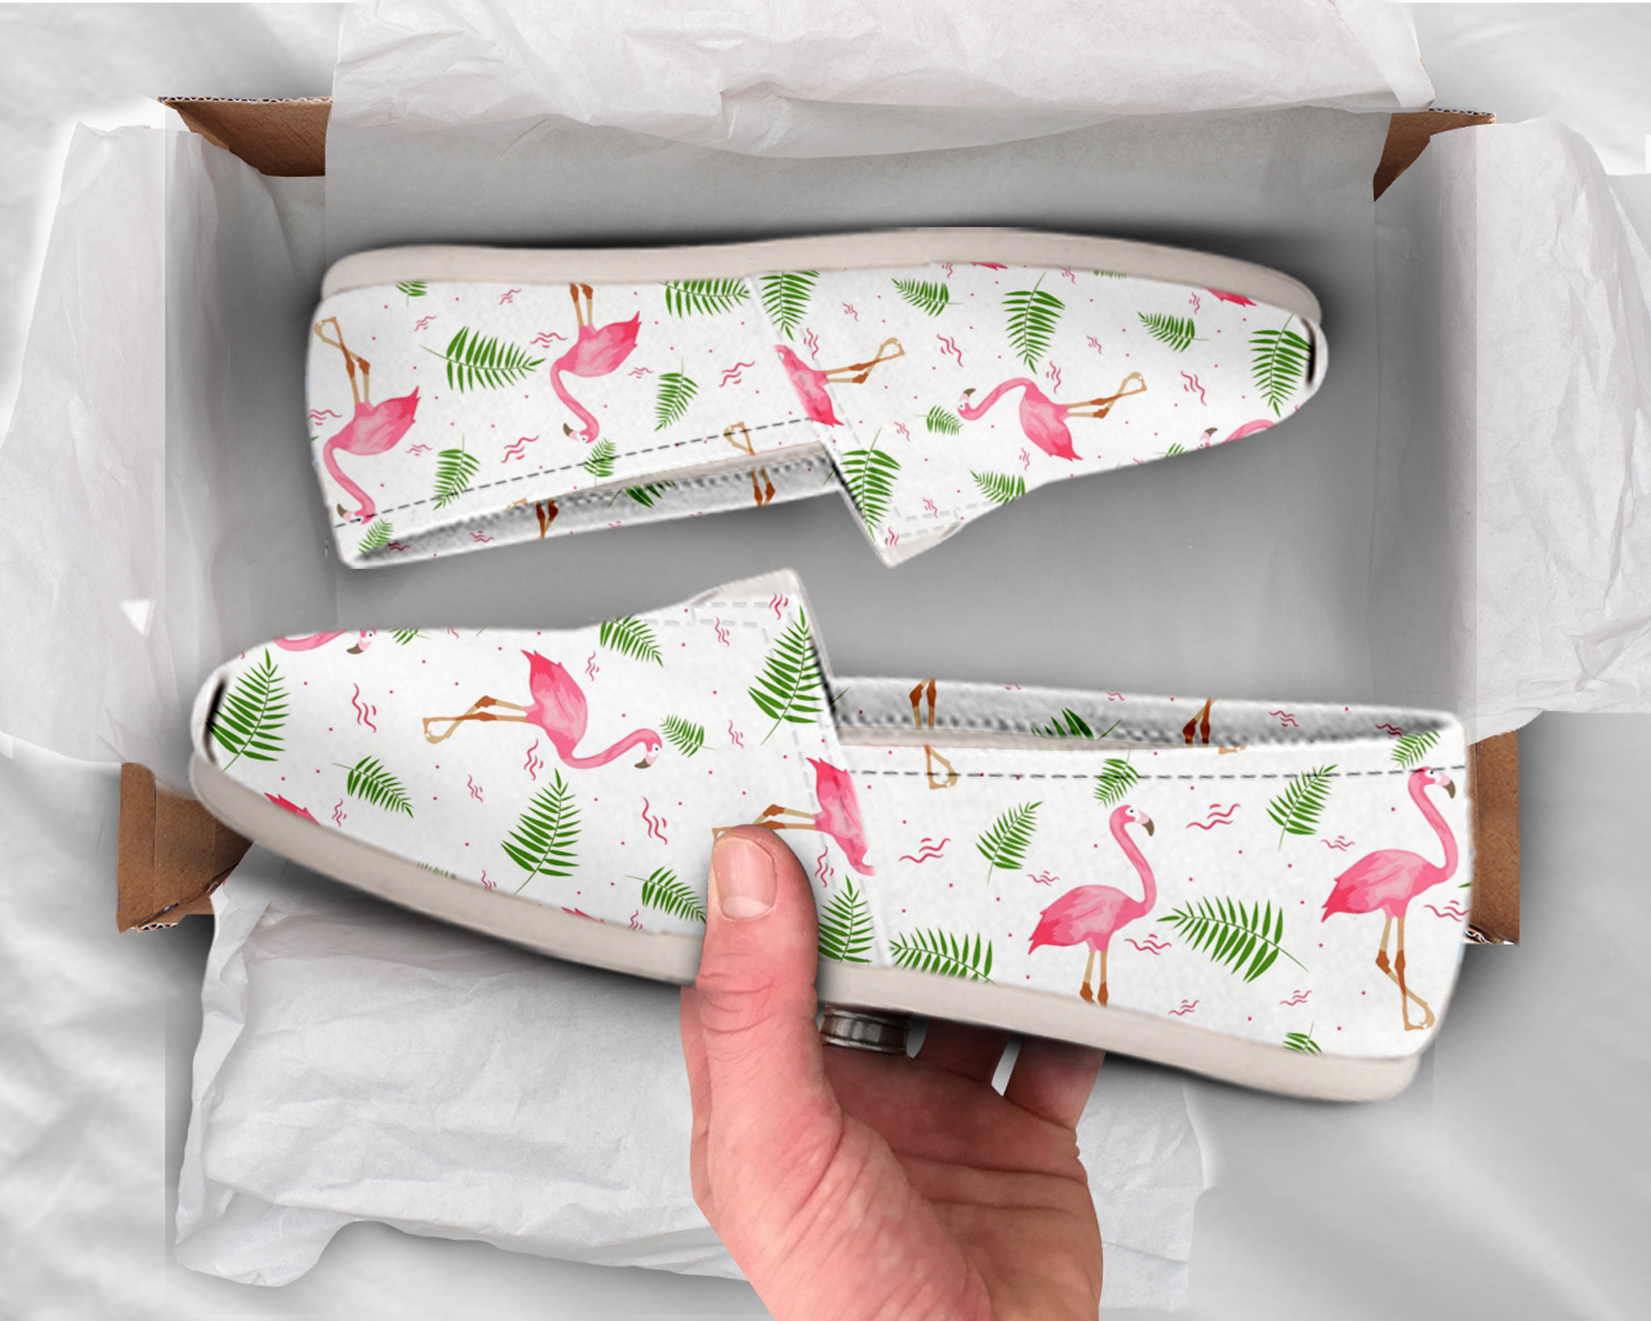 Slip-On Flamingo Shoes | Custom Canvas Sneakers For Kids & Adults